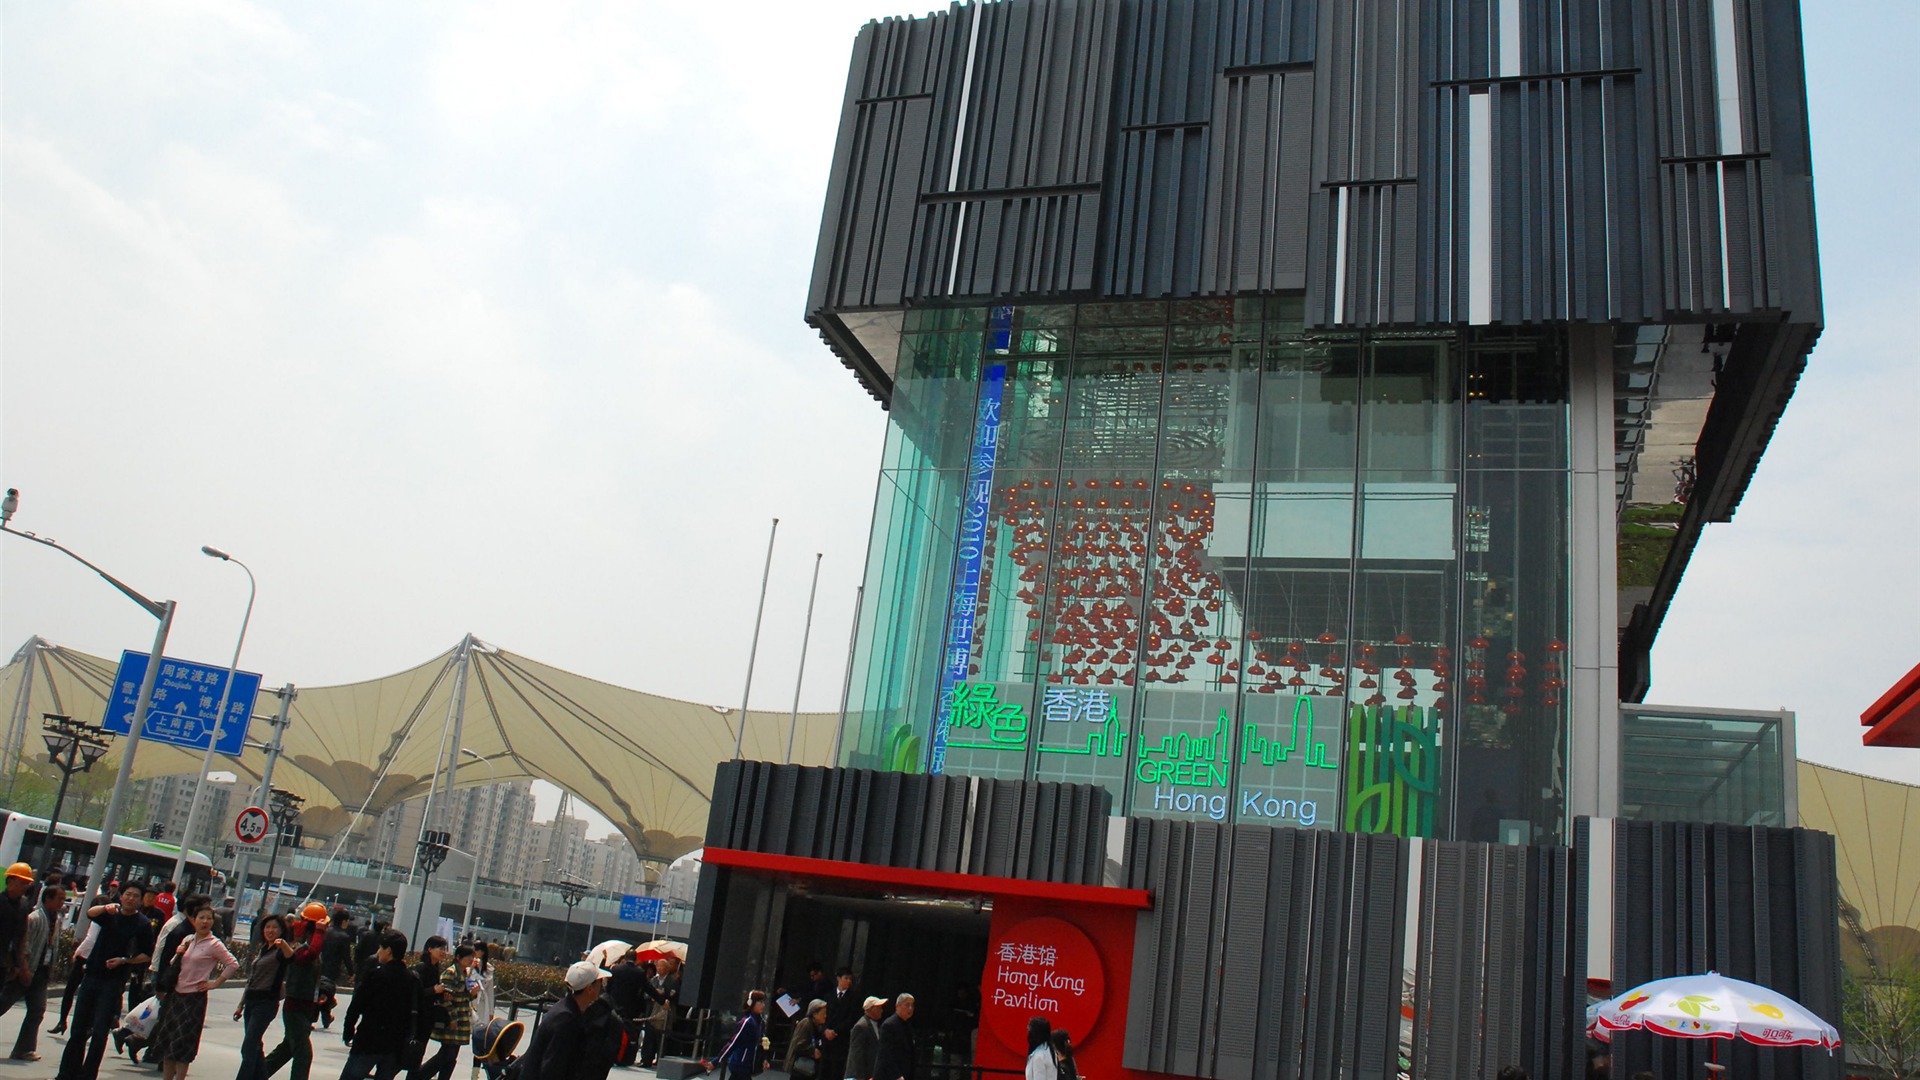 Commissioning of the 2010 Shanghai World Expo (studious works) #13 - 1920x1080